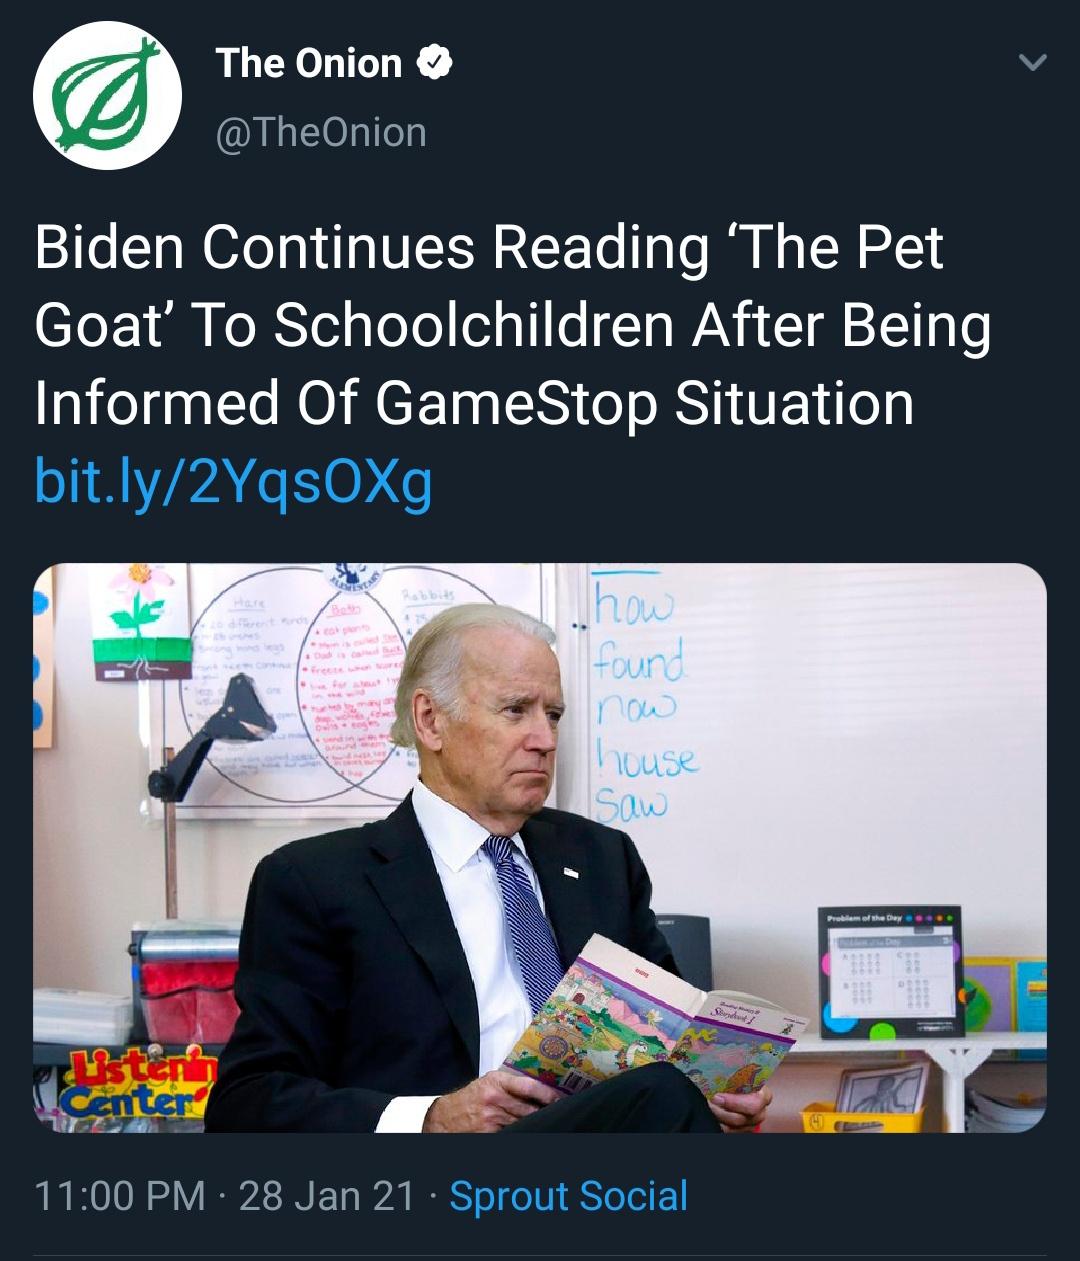 onion - The Onion Biden Continues Reading 'The Pet Goat' To Schoolchildren After Being Informed Of GameStop Situation bit.ly2Yqsoxg how found Inow house Isaw Problem of the Dhewe misten ter 28 Jan 21 Sprout Social